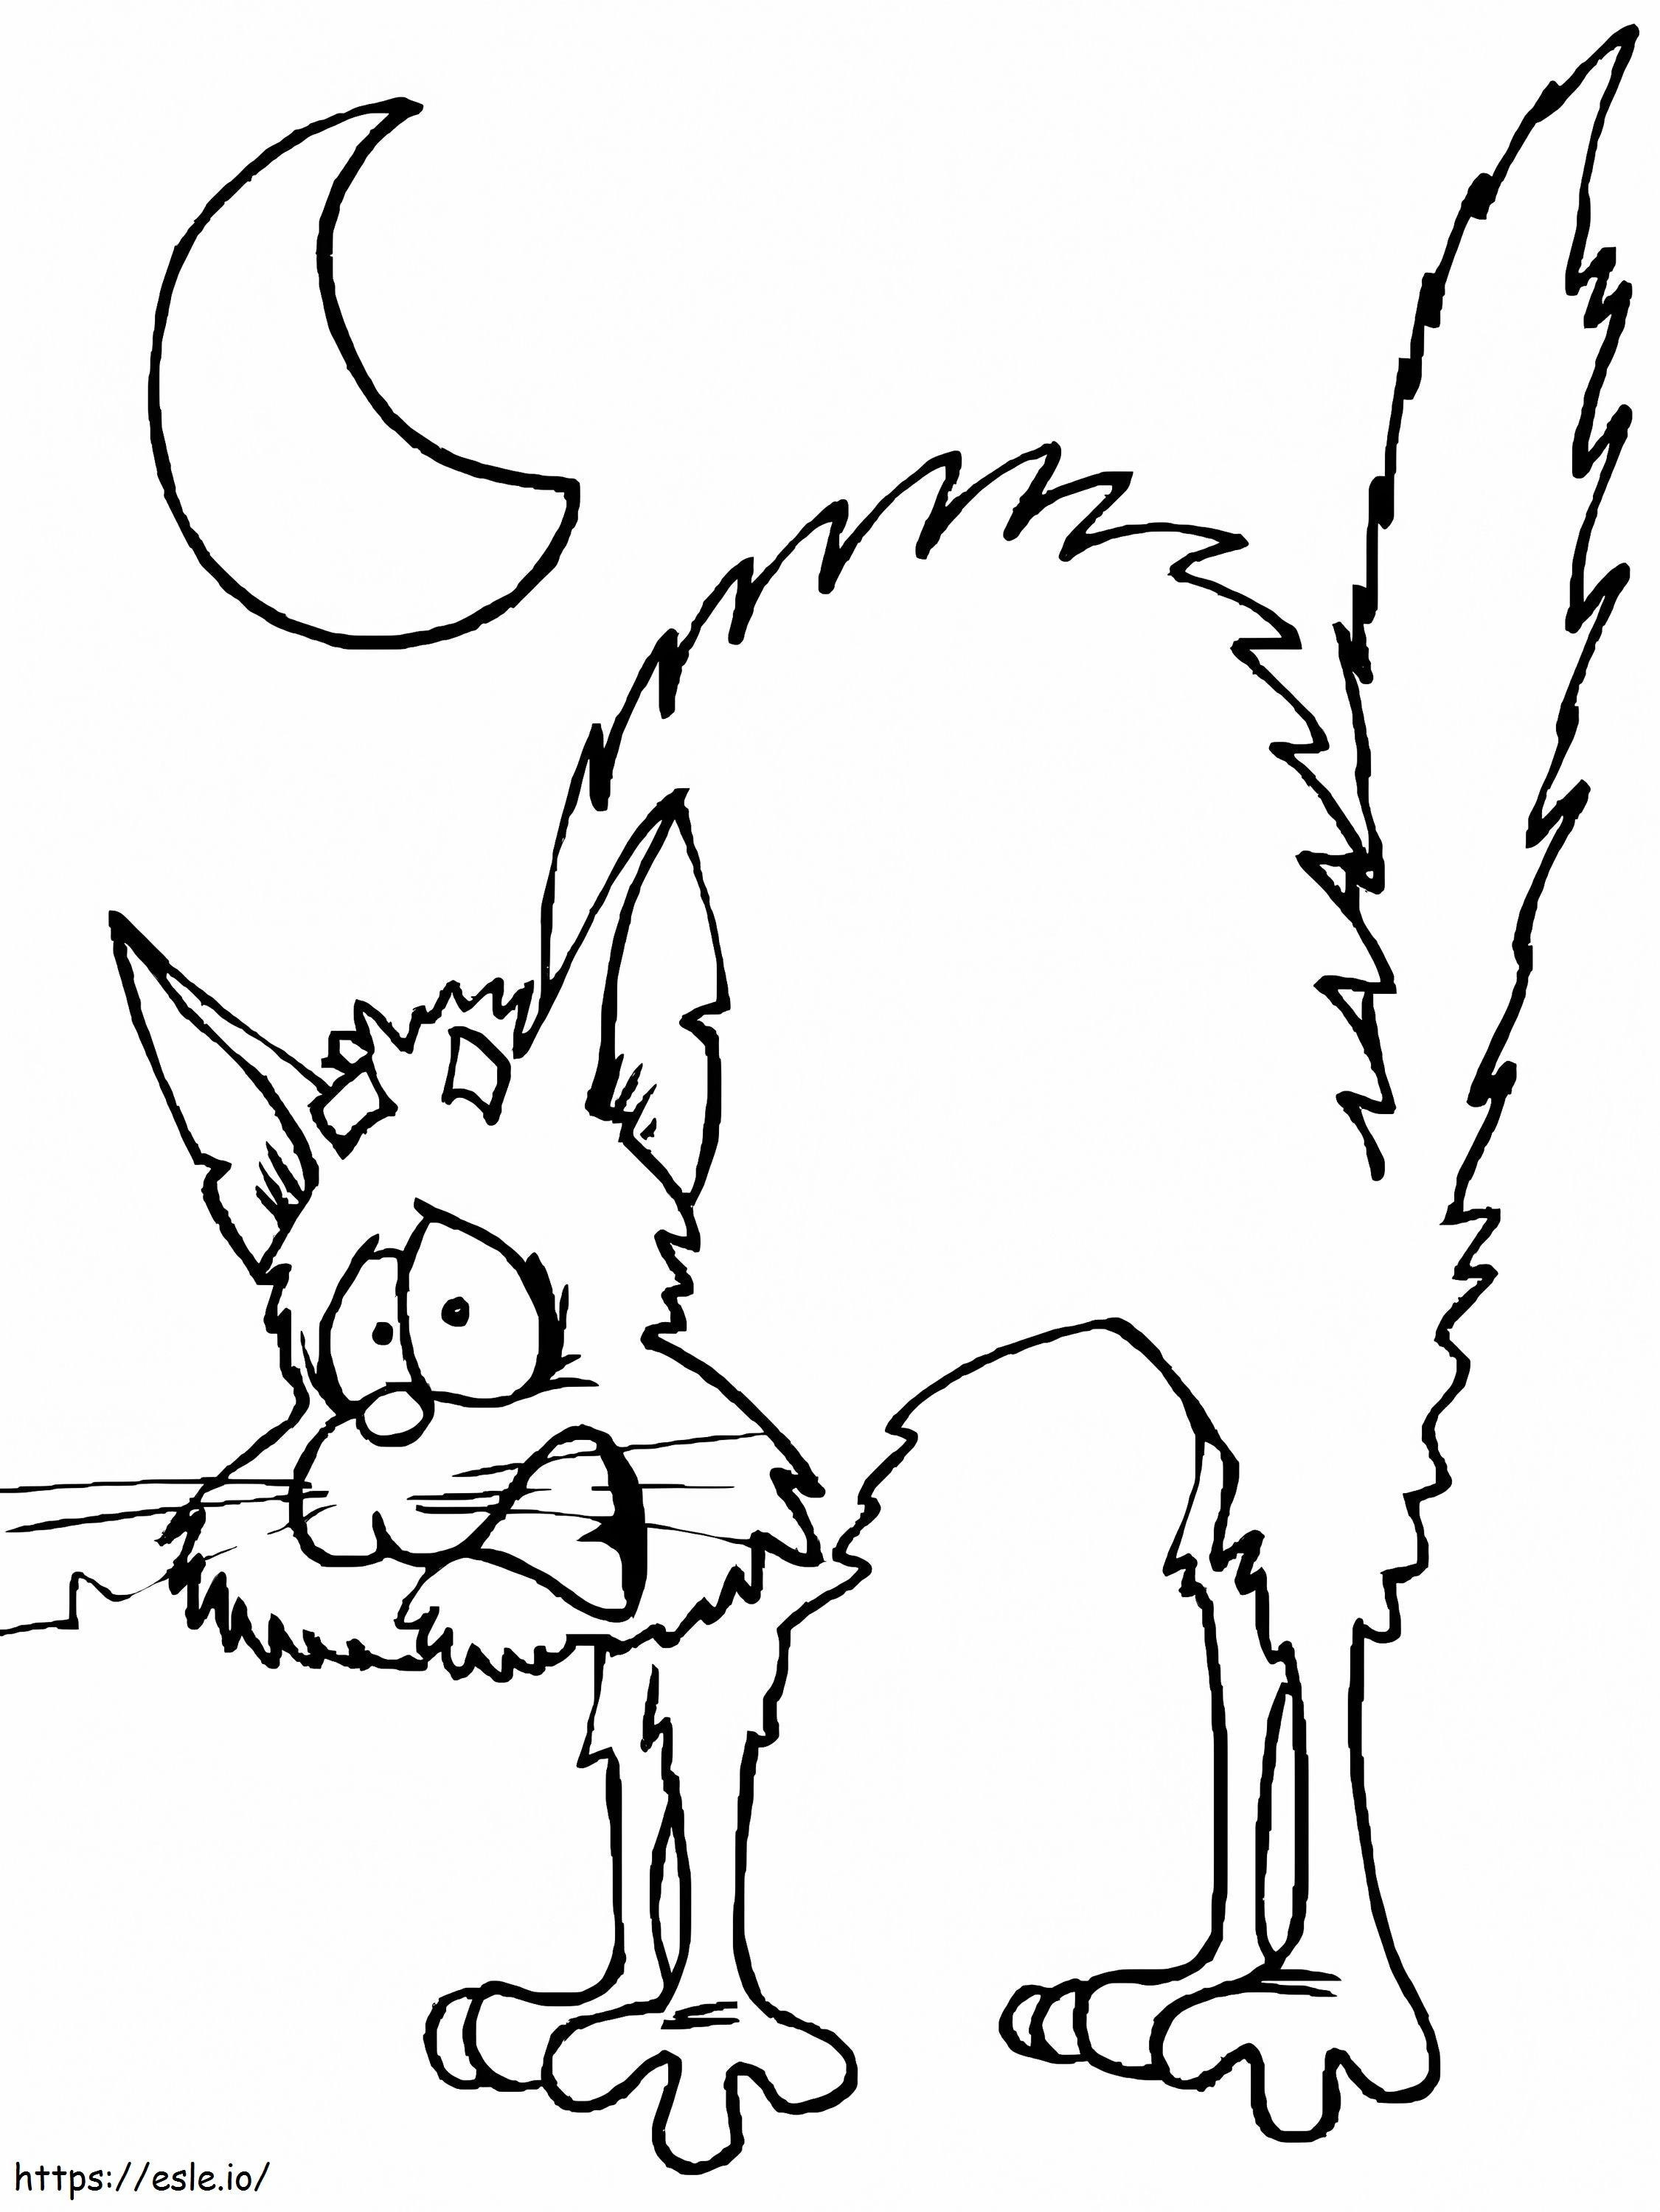 Cat Is Scared coloring page